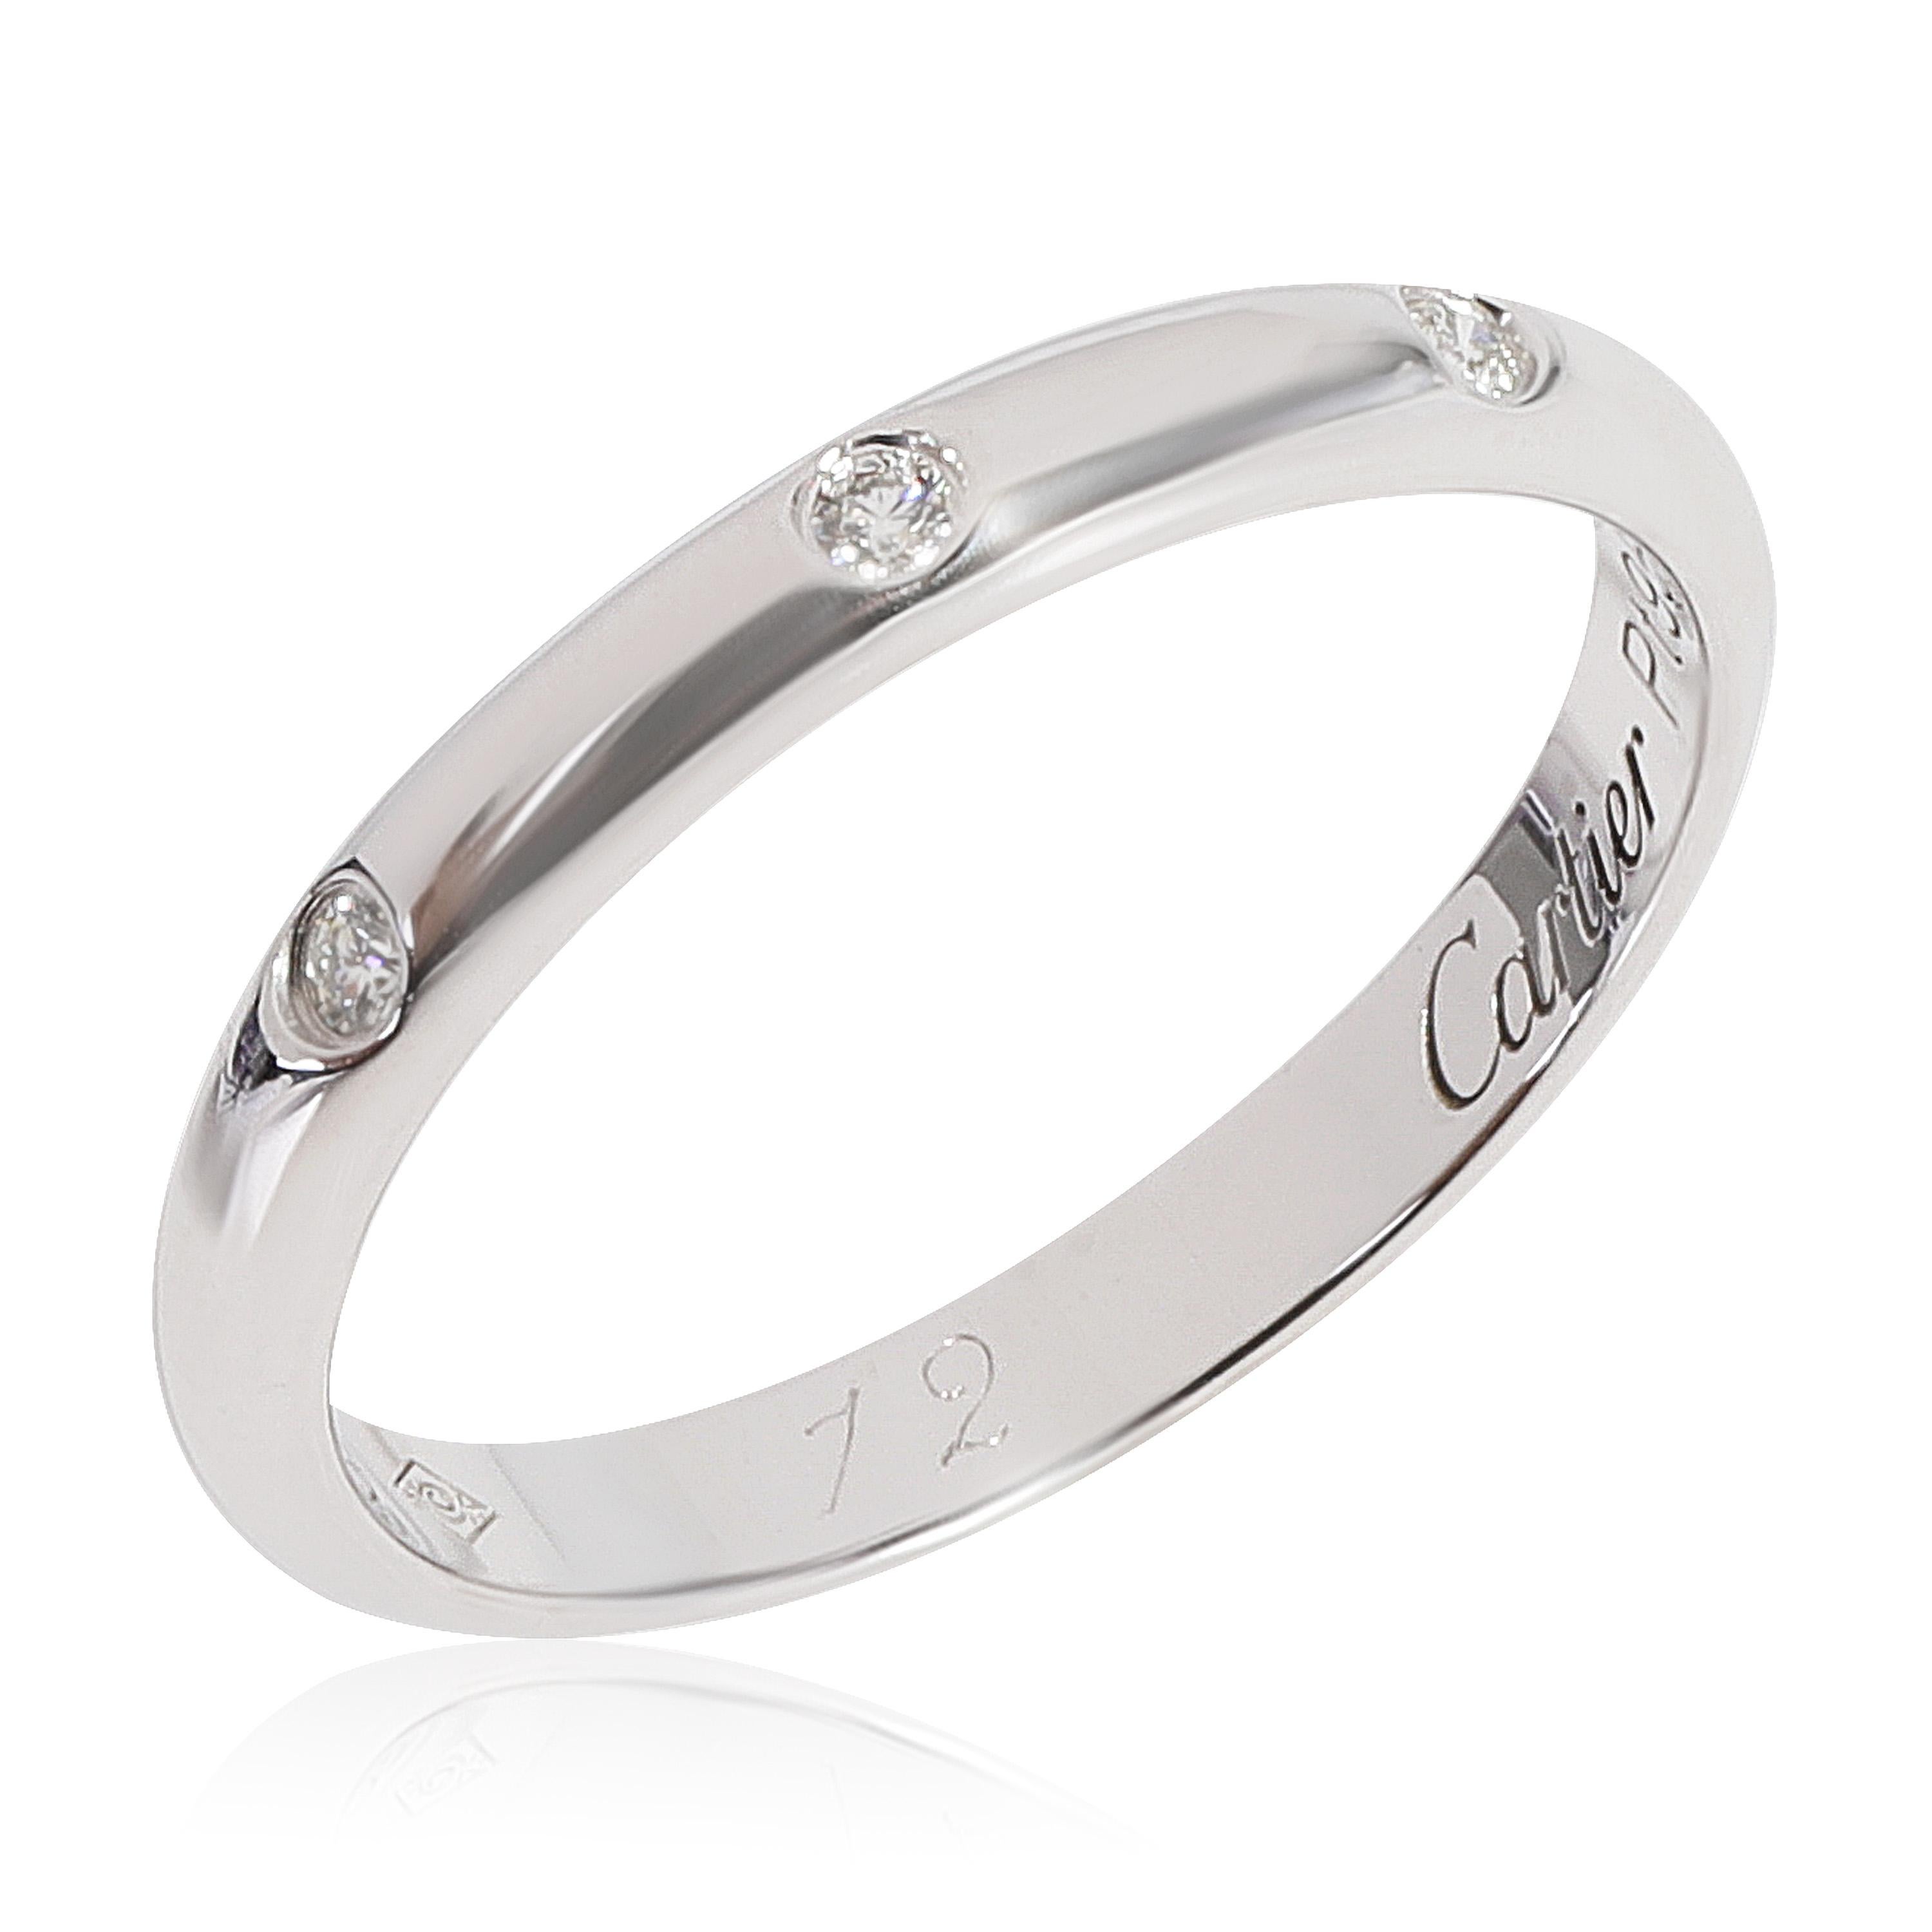 Cartier 1895 Diamond Wedding Band in Platinum 0.03 CTW

PRIMARY DETAILS
SKU: 117543
Listing Title: Cartier 1895 Diamond Wedding Band in Platinum 0.03 CTW
Condition Description: Retails for 1740 USD. In excellent condition and recently polished. Ring